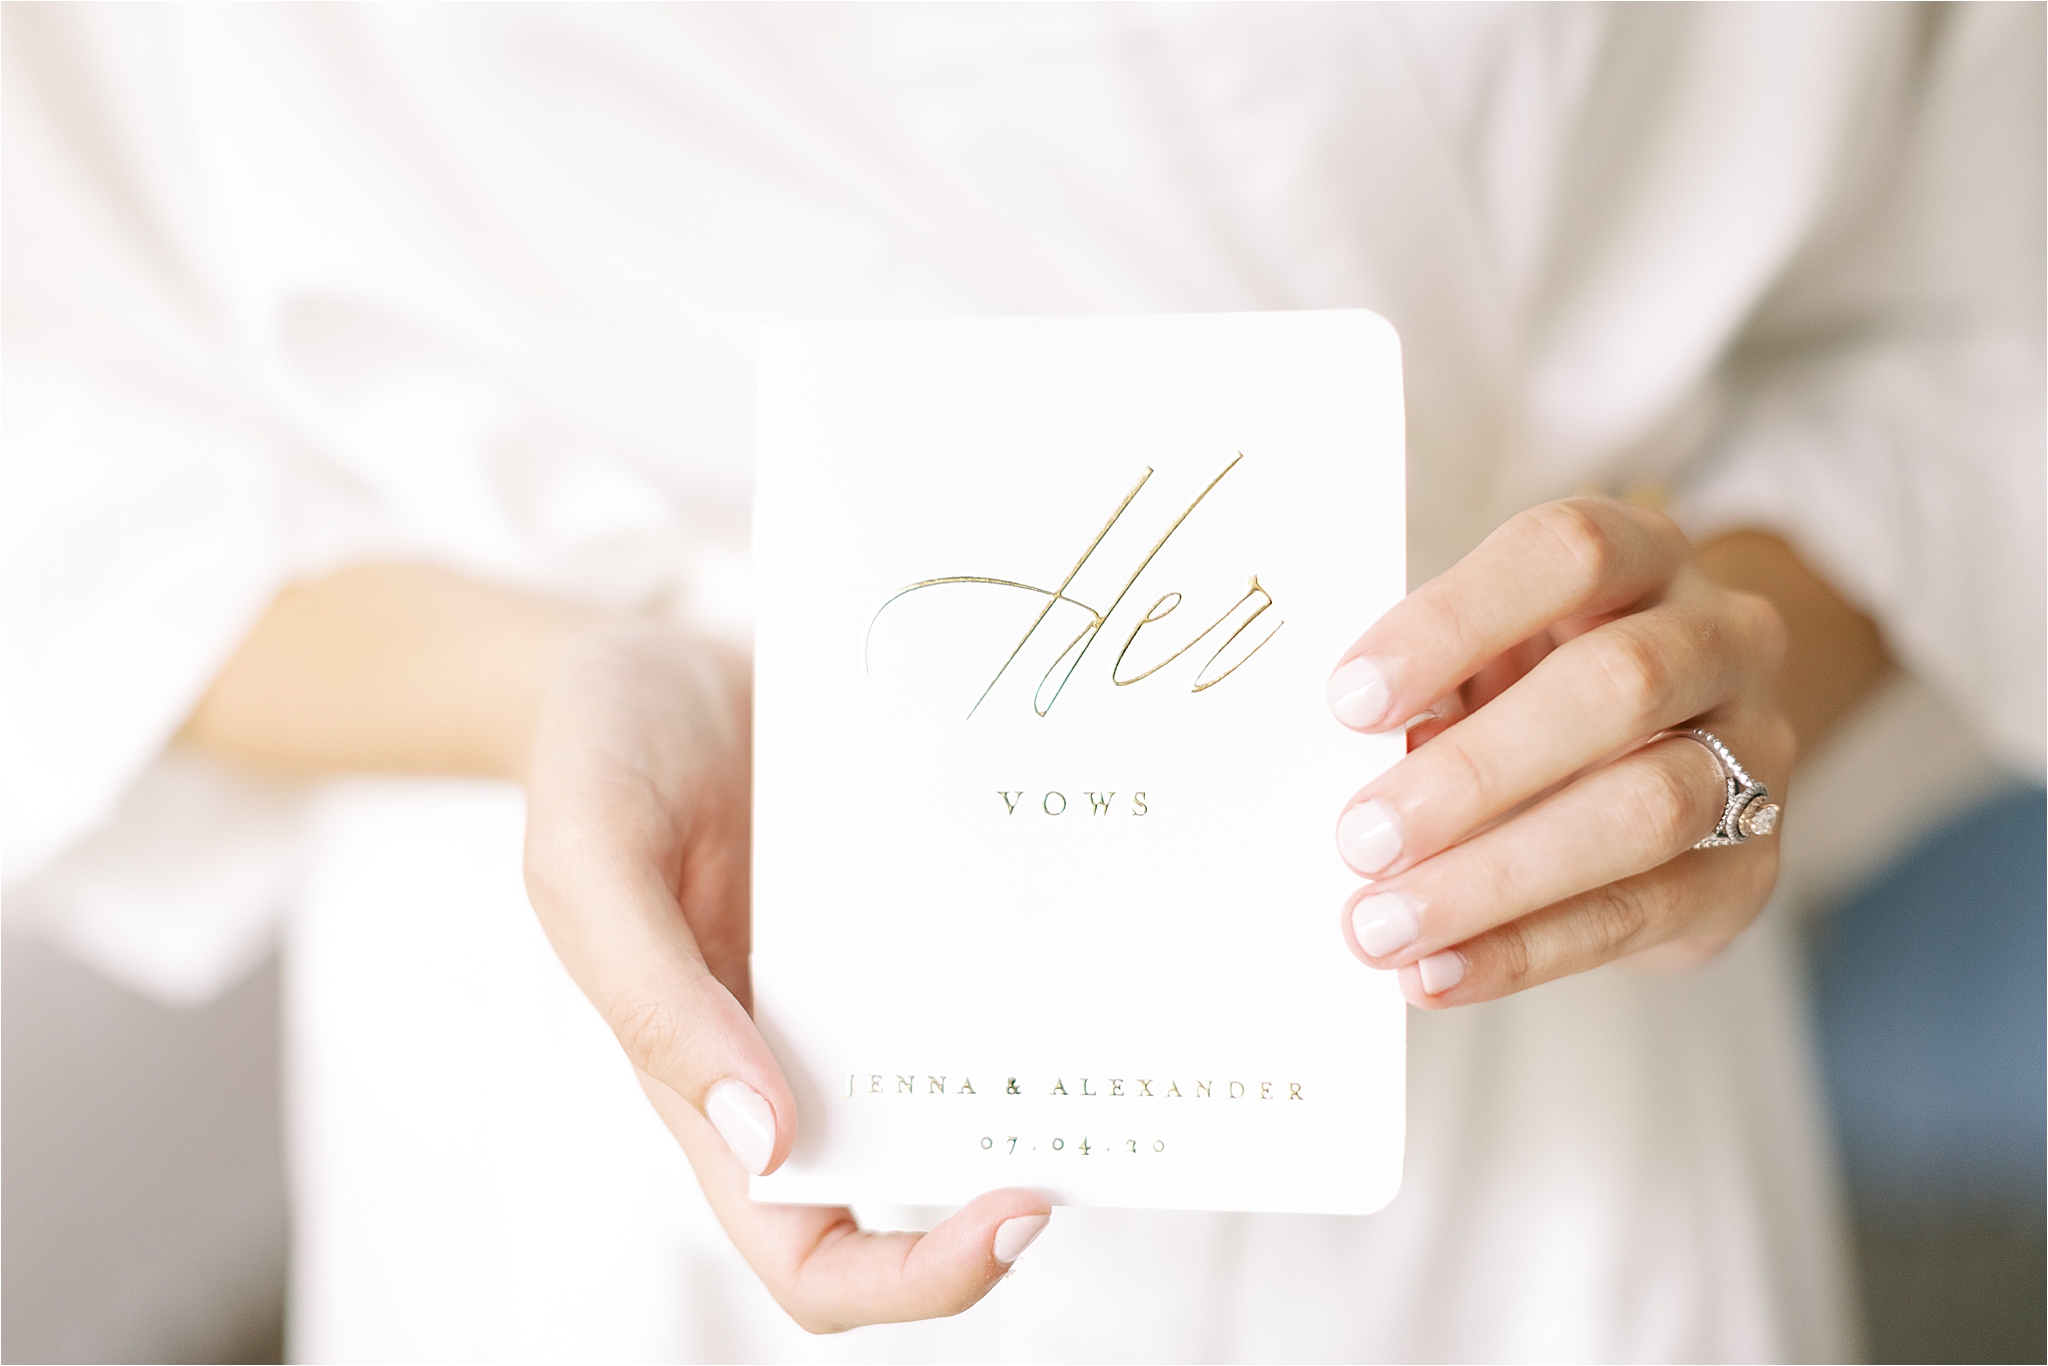 white and gold vow book being held by bride